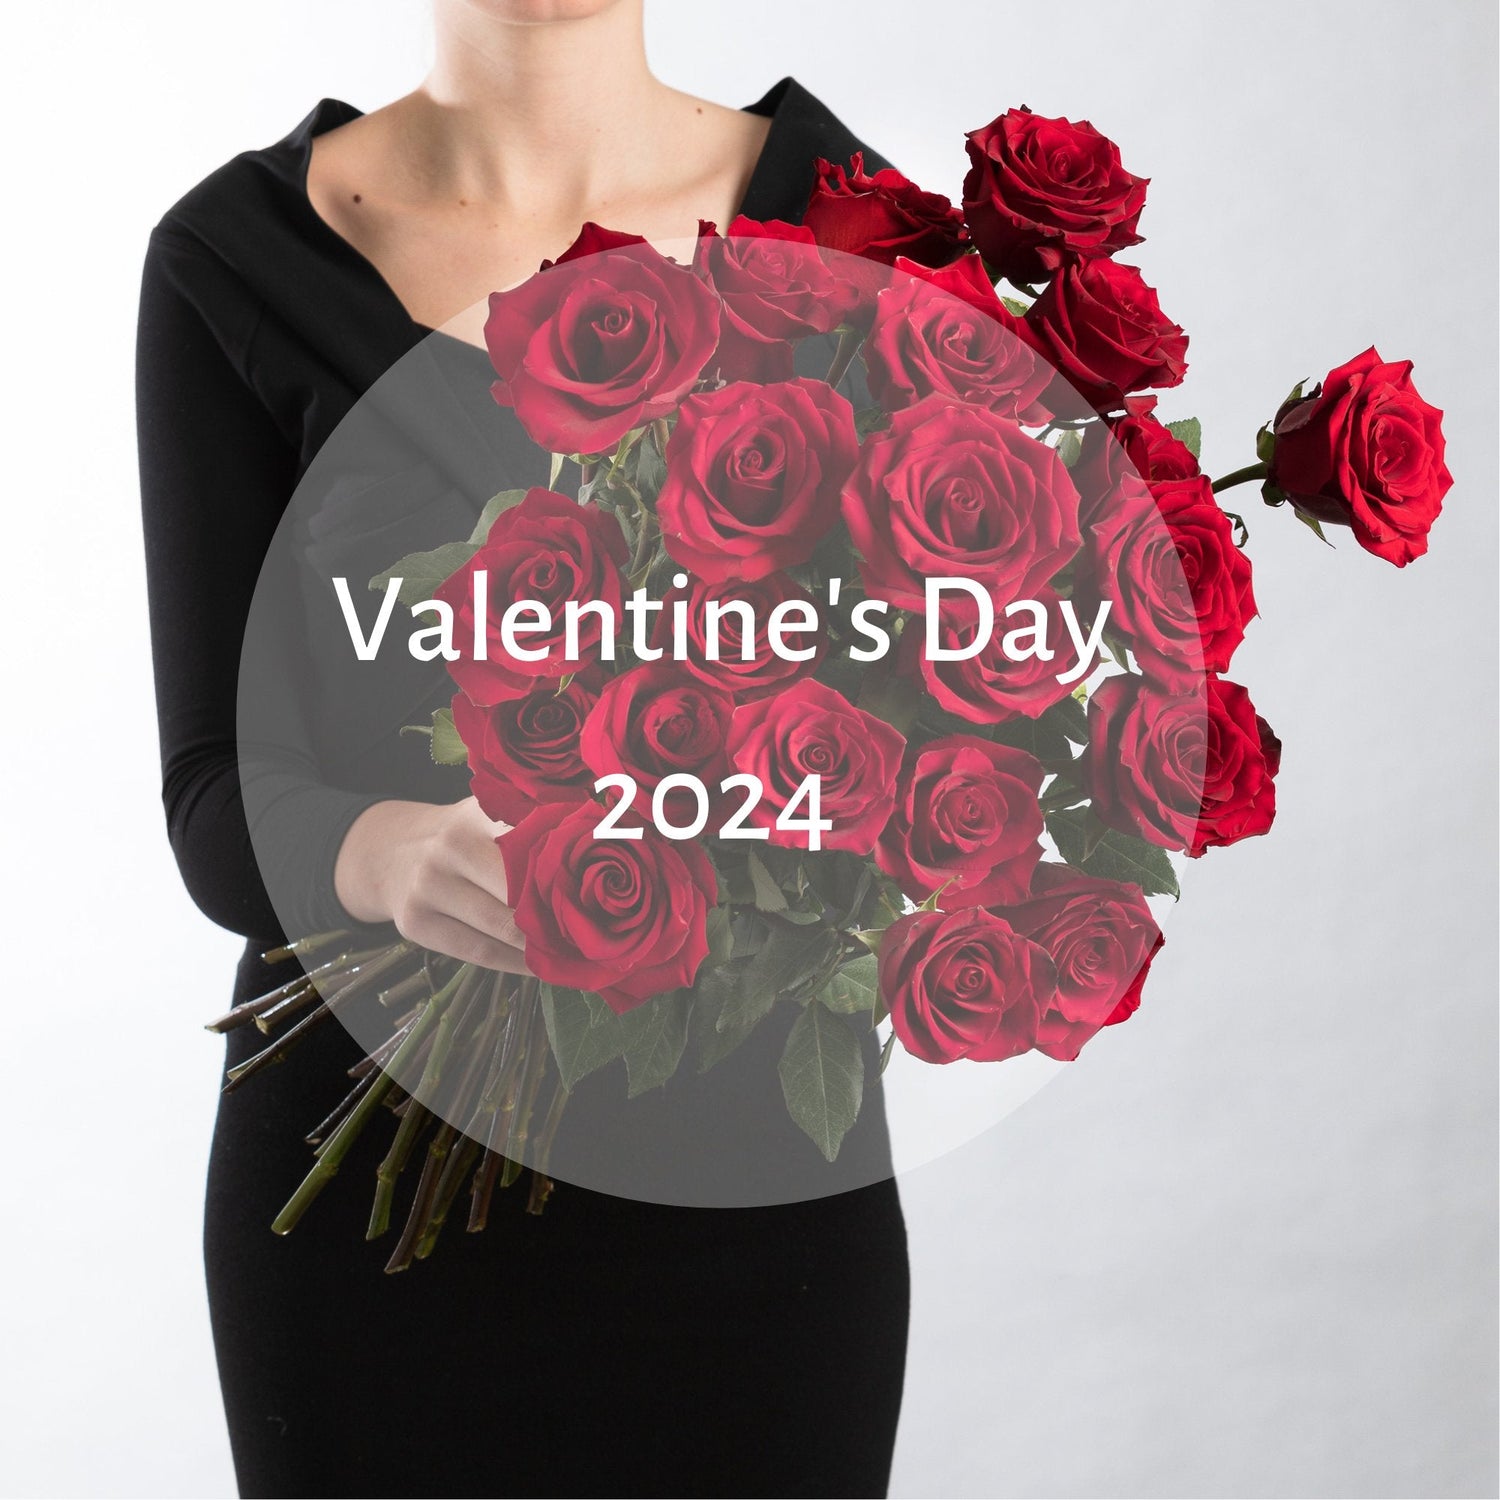 A woman wearing black holding a bunch of long stemmed red roses made in a bouquet.